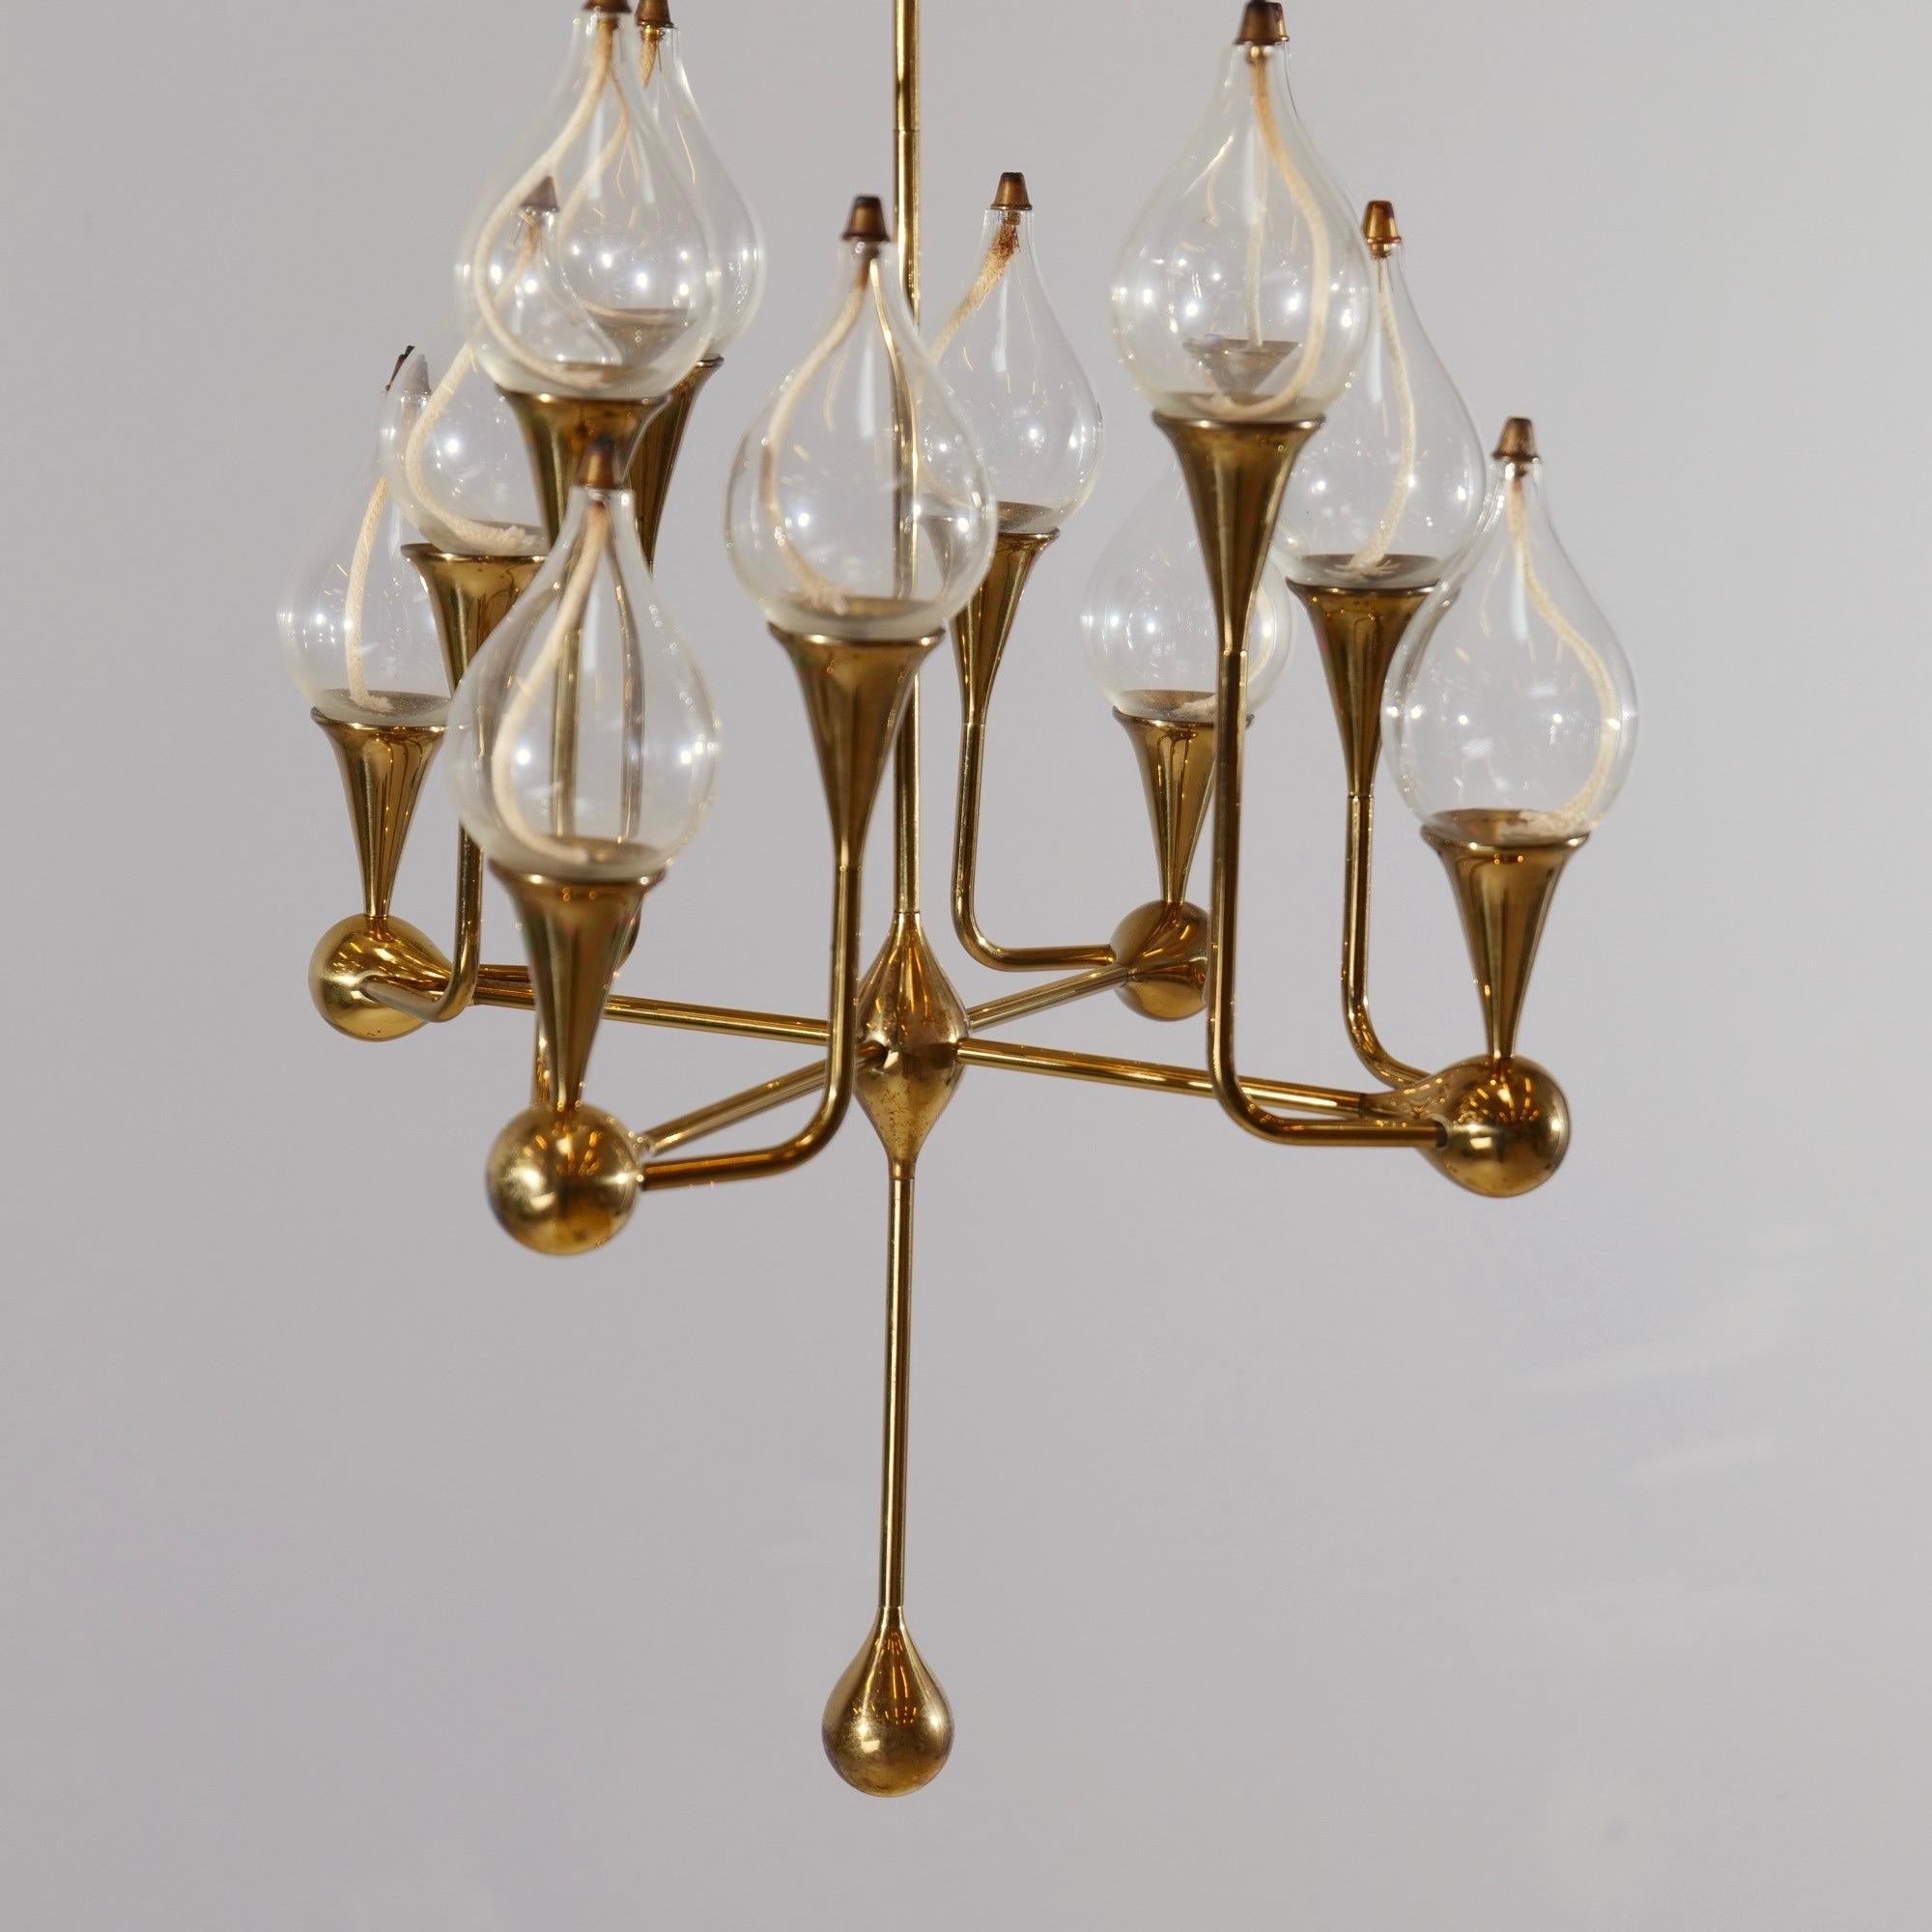 German Mid Century Brass Candle Chandelier and Two Matching Sconces by Freddie Andersen